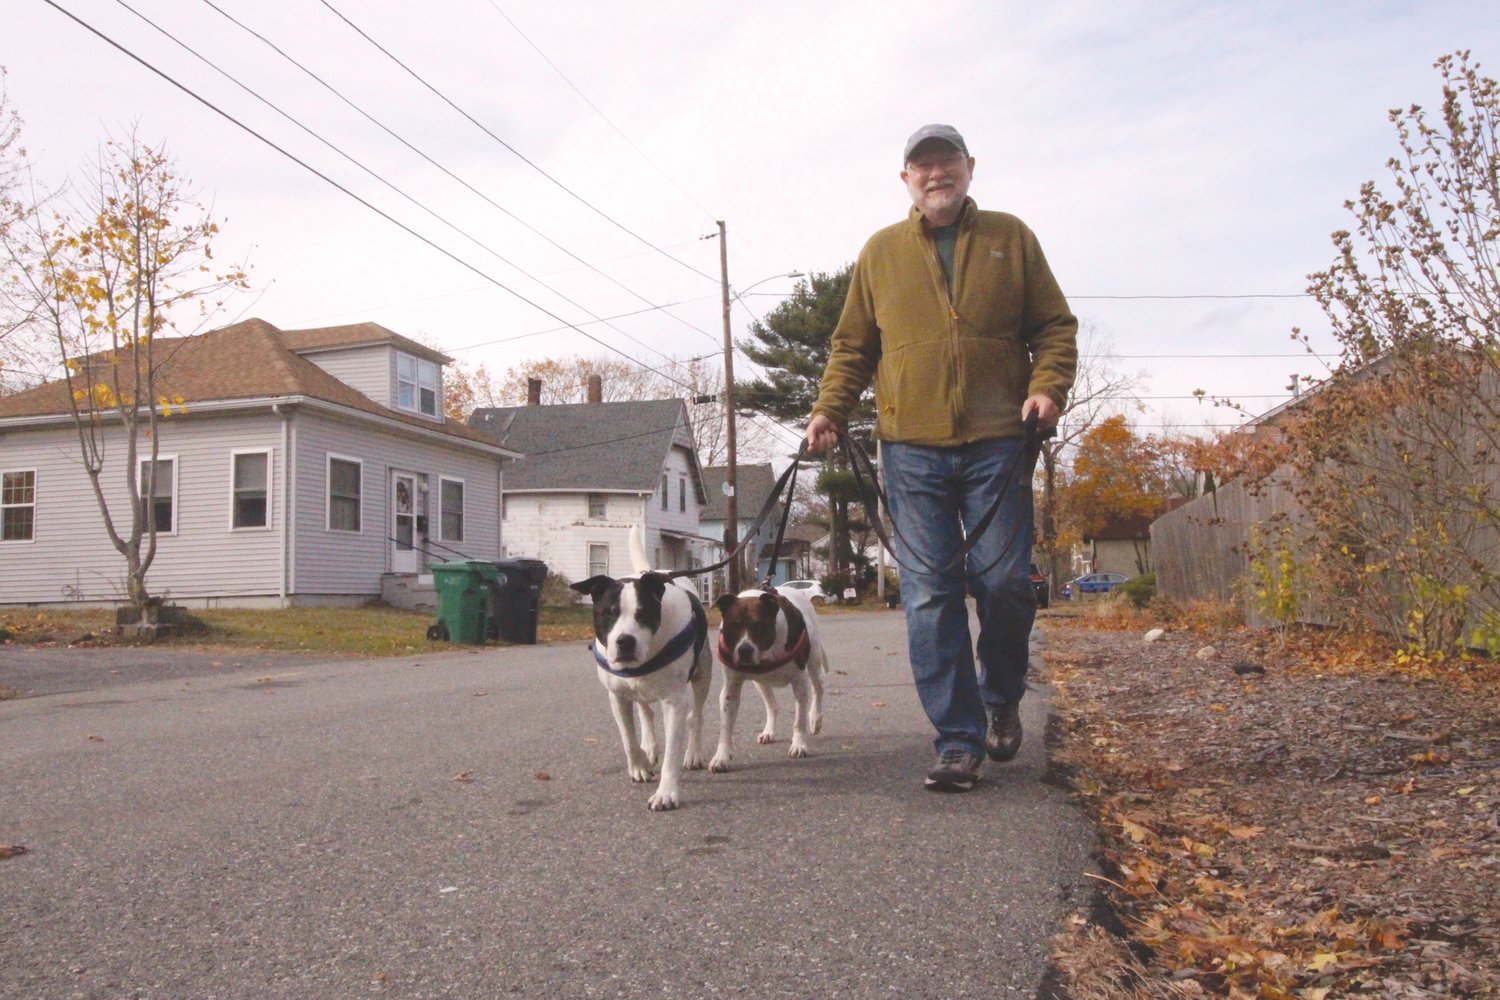 THEY WON’T BE GOING:  Jamie Boblitt and Jack and Freckles do their walk on Bellman Avenue. The dogs won’t be accompanying him when he takes on the Appalachian trail next spring.